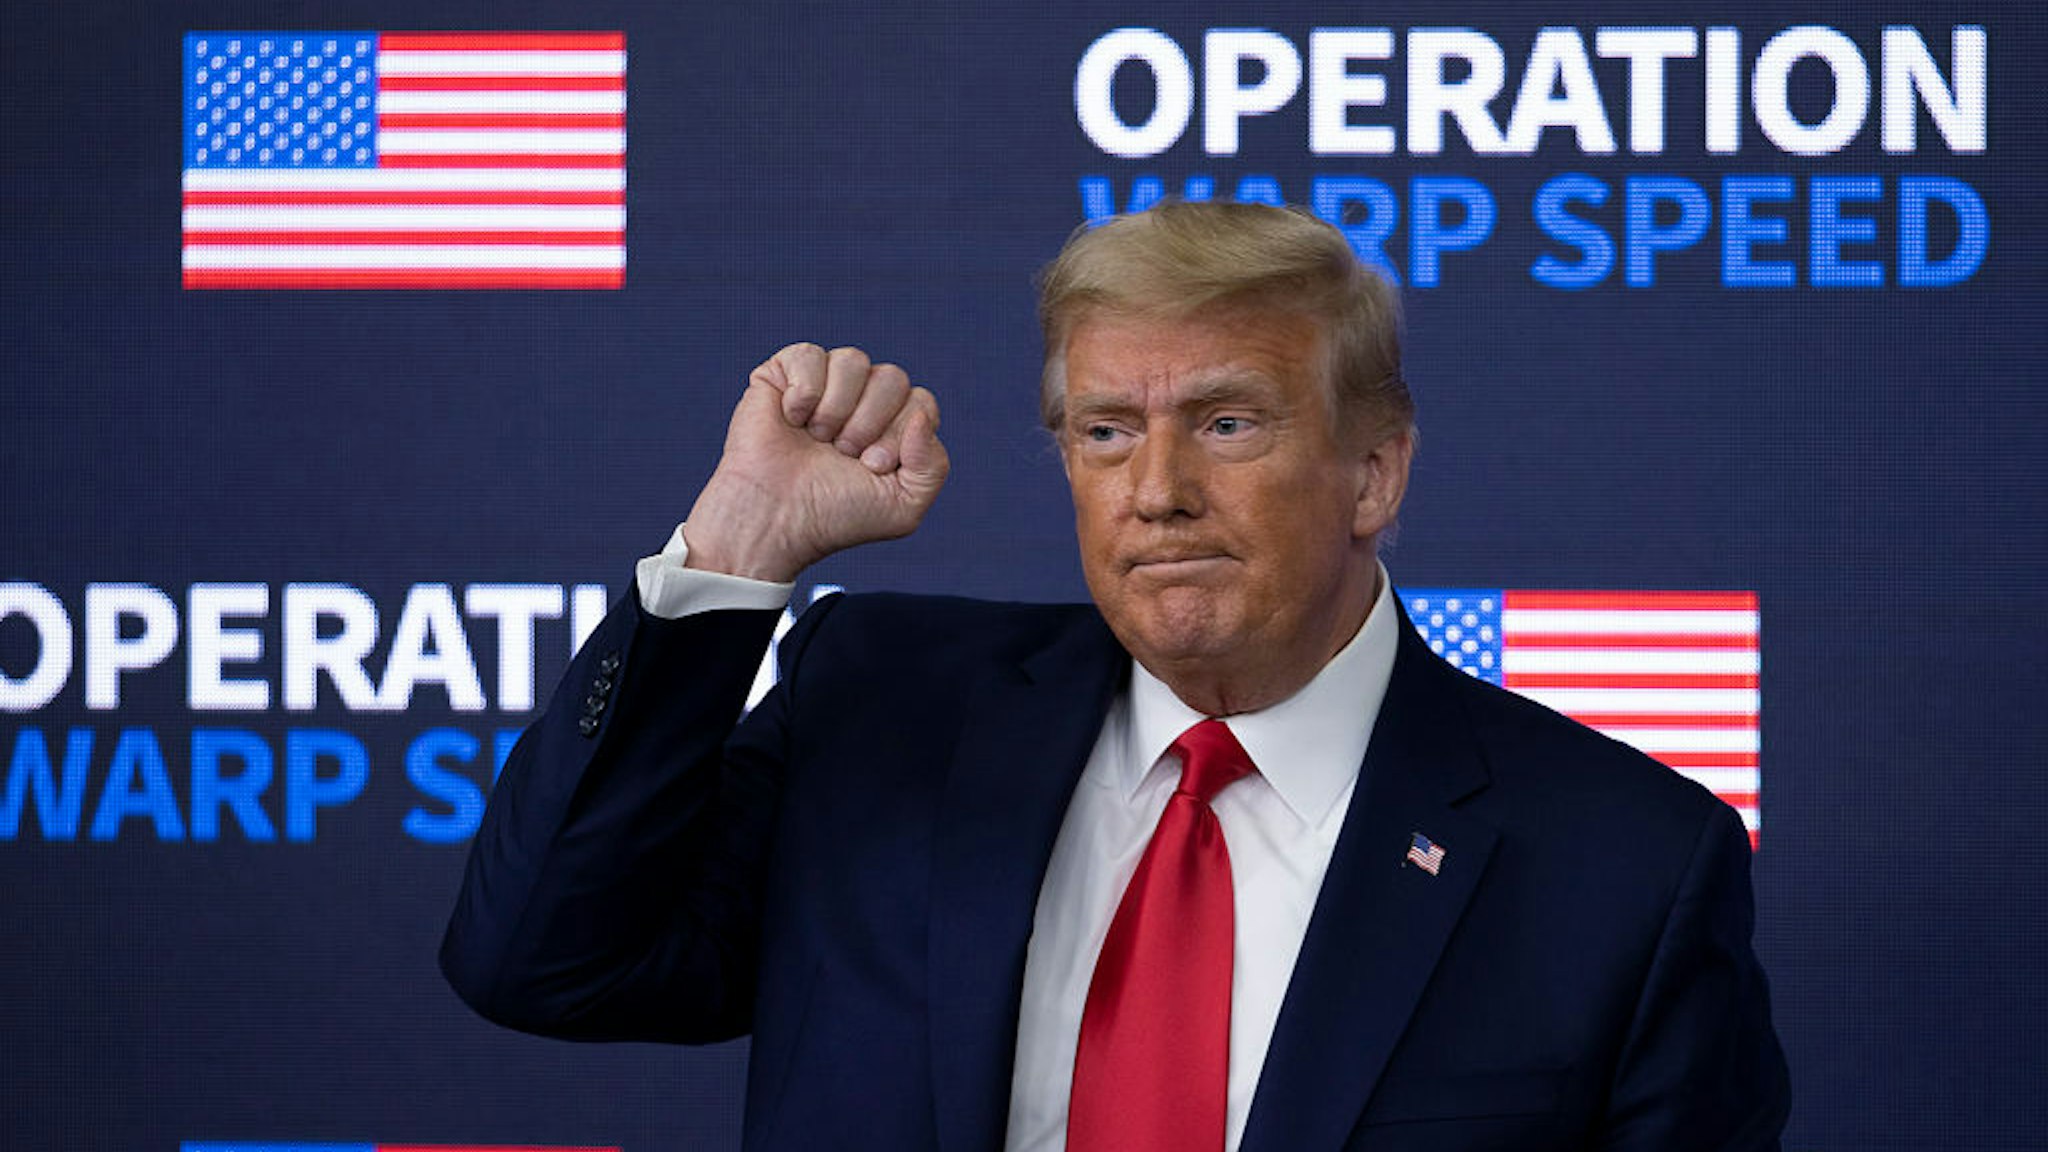 US President Donald Trump greets the crowd before he leaves at the Operation Warp Speed Vaccine Summit on December 08, 2020 in Washington, DC.